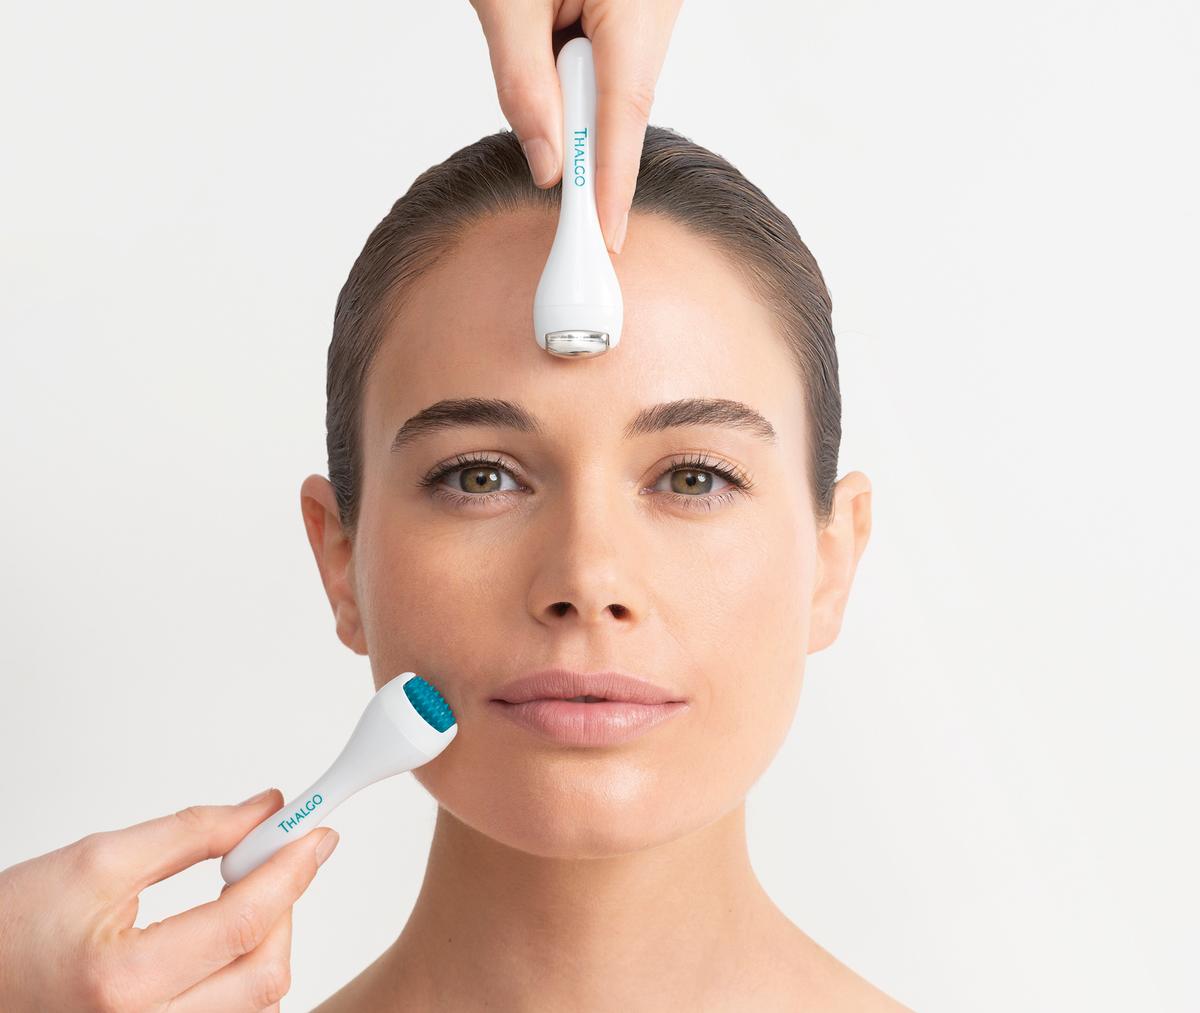 Thalgo has formulated a new soothing 60-minute wrinkle-correcting facial using the Hyalu-Procollagène range and roller boosters / 